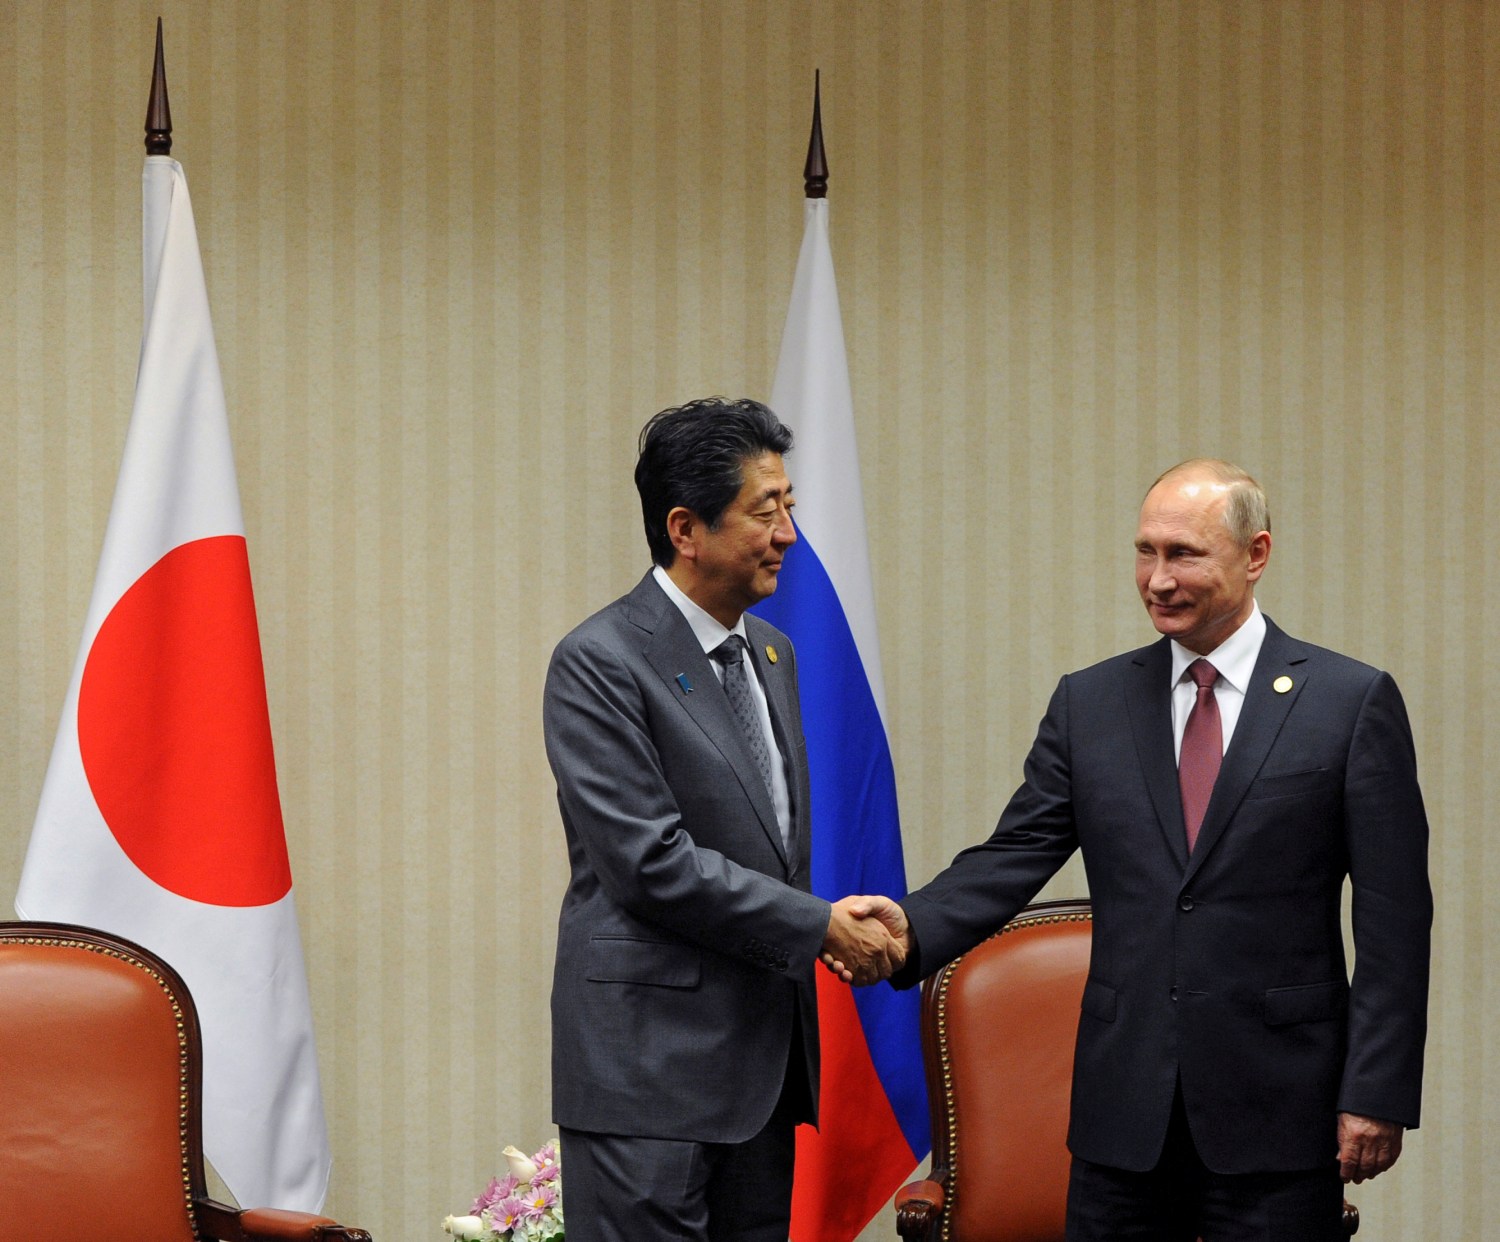 Russian President Vladimir Putin (R) and Japanese Prime Minister Shinzo Abe attend a meeting on the sidelines of the Asia-Pacific Economic Cooperation (APEC) Summit